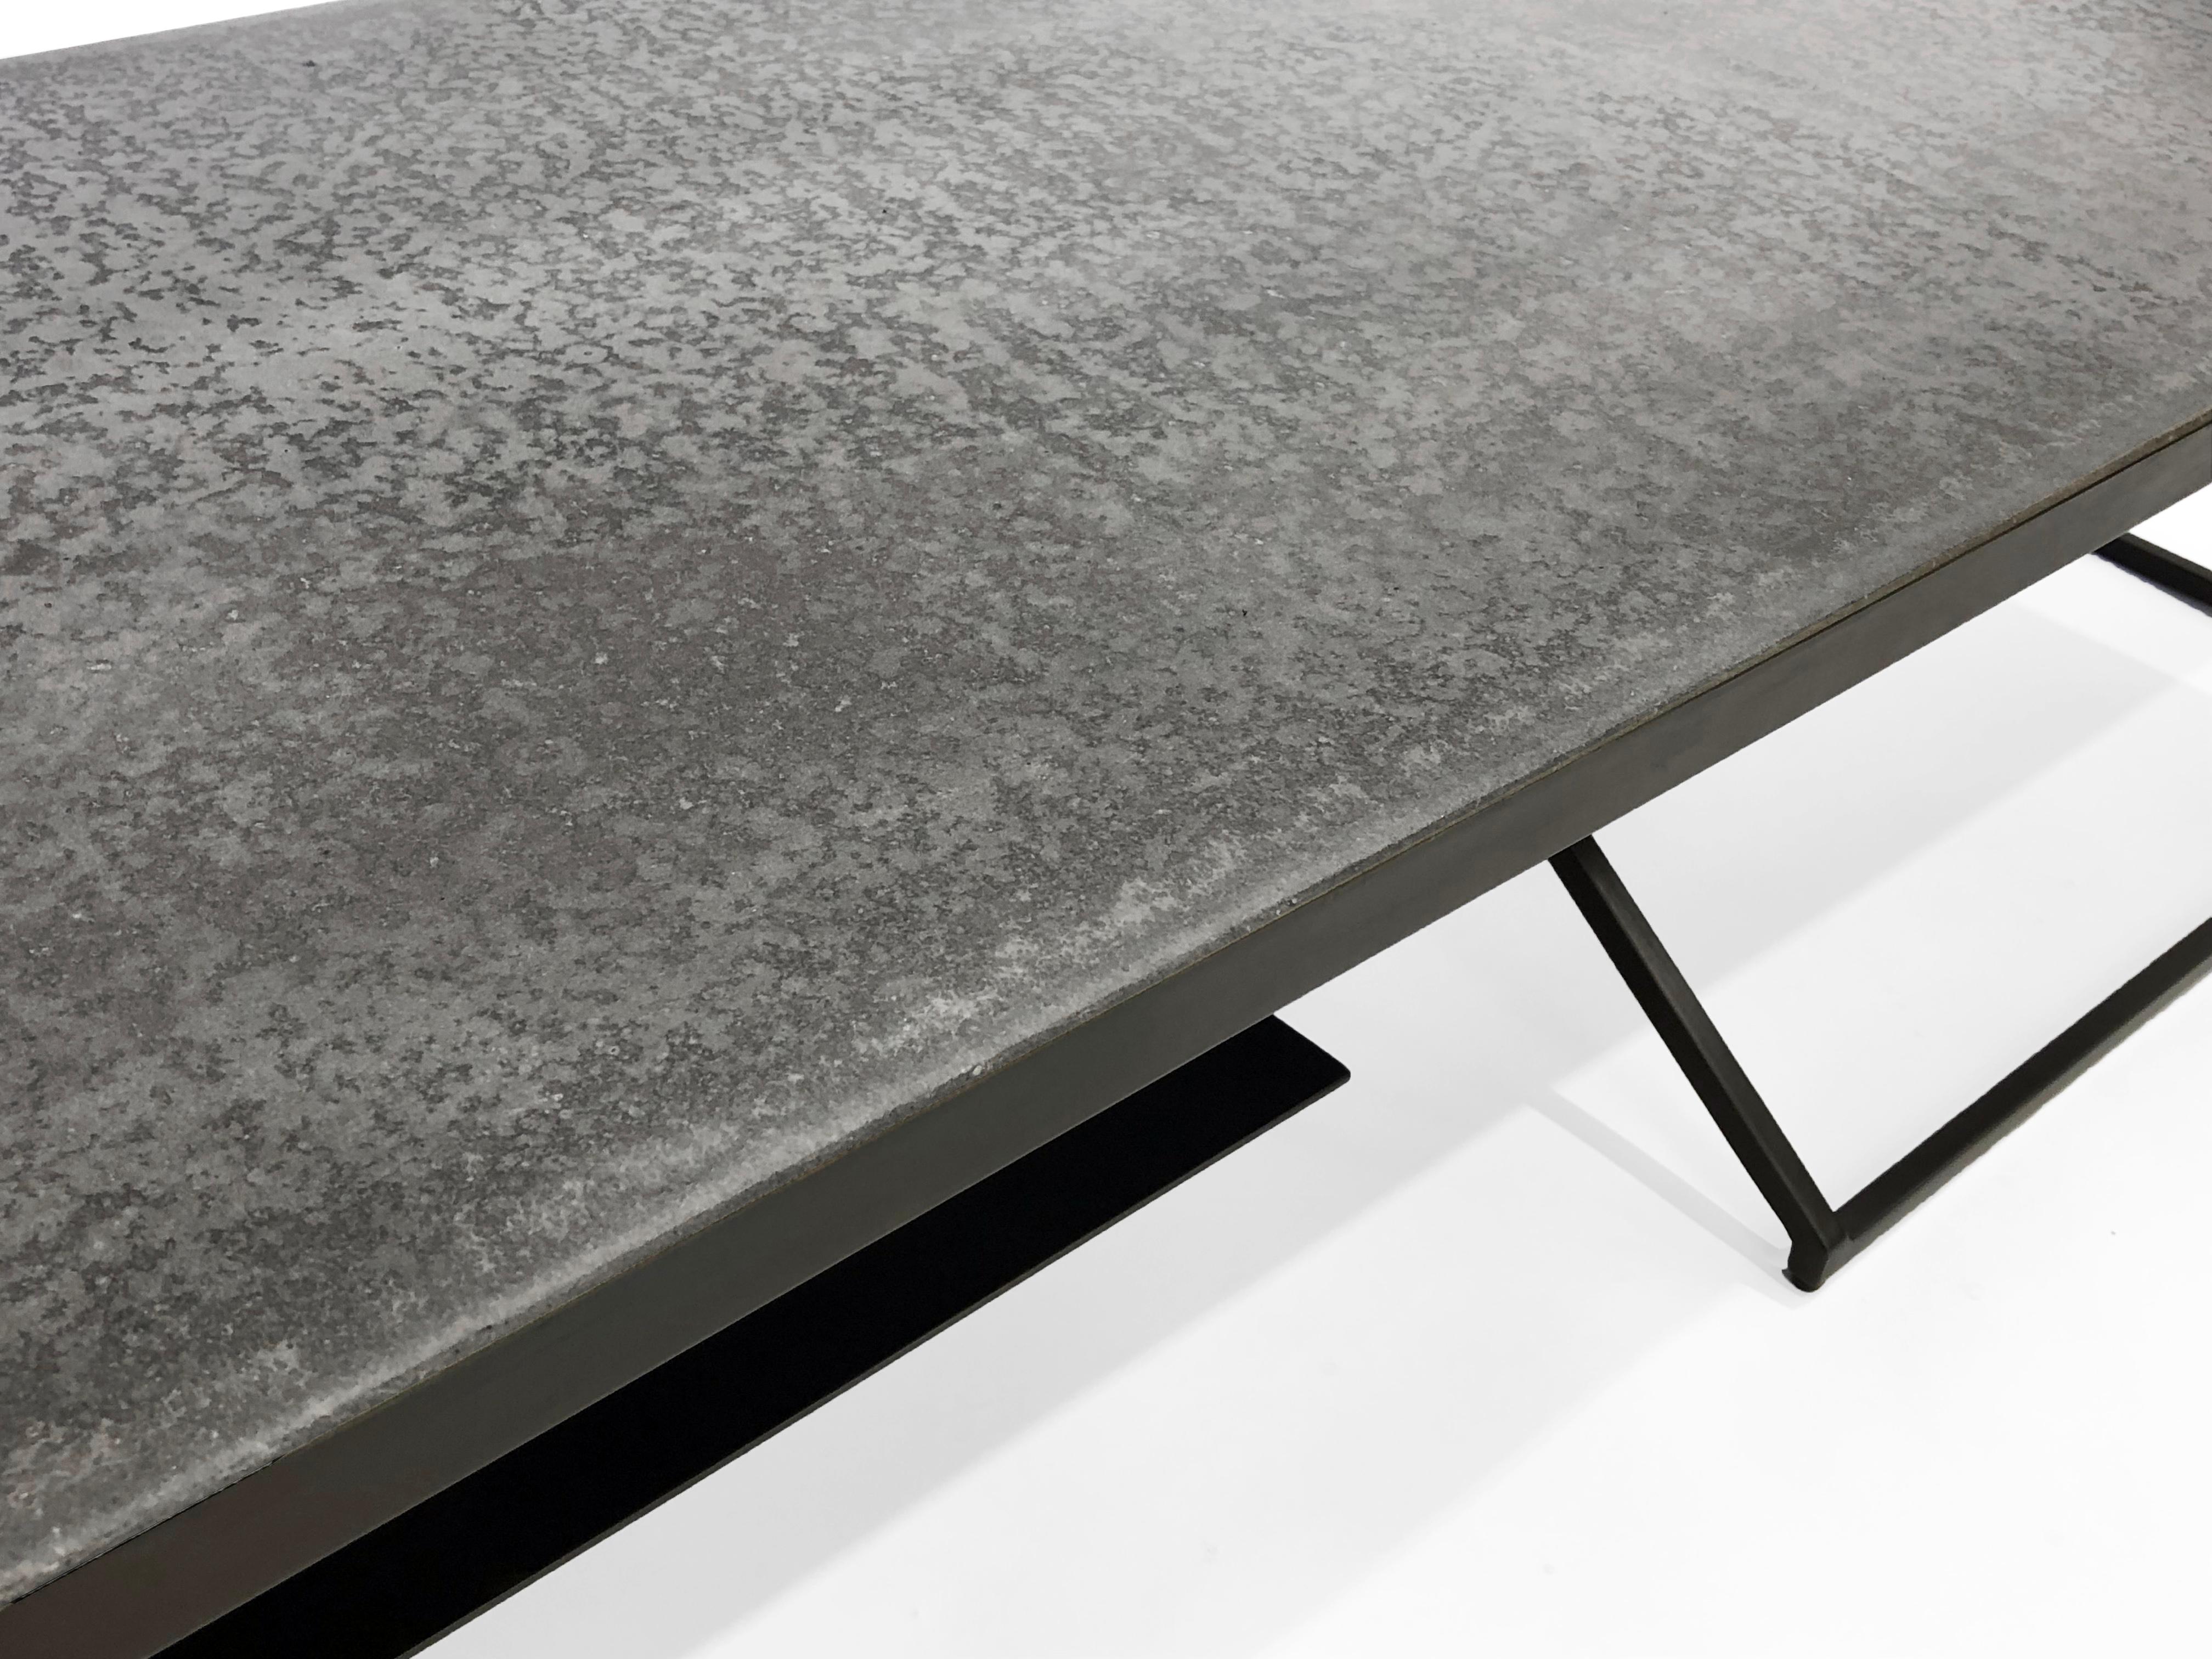 American Grey Bird Coffee Table, Concrete + Steel Collection from Joshua Howe Design  For Sale